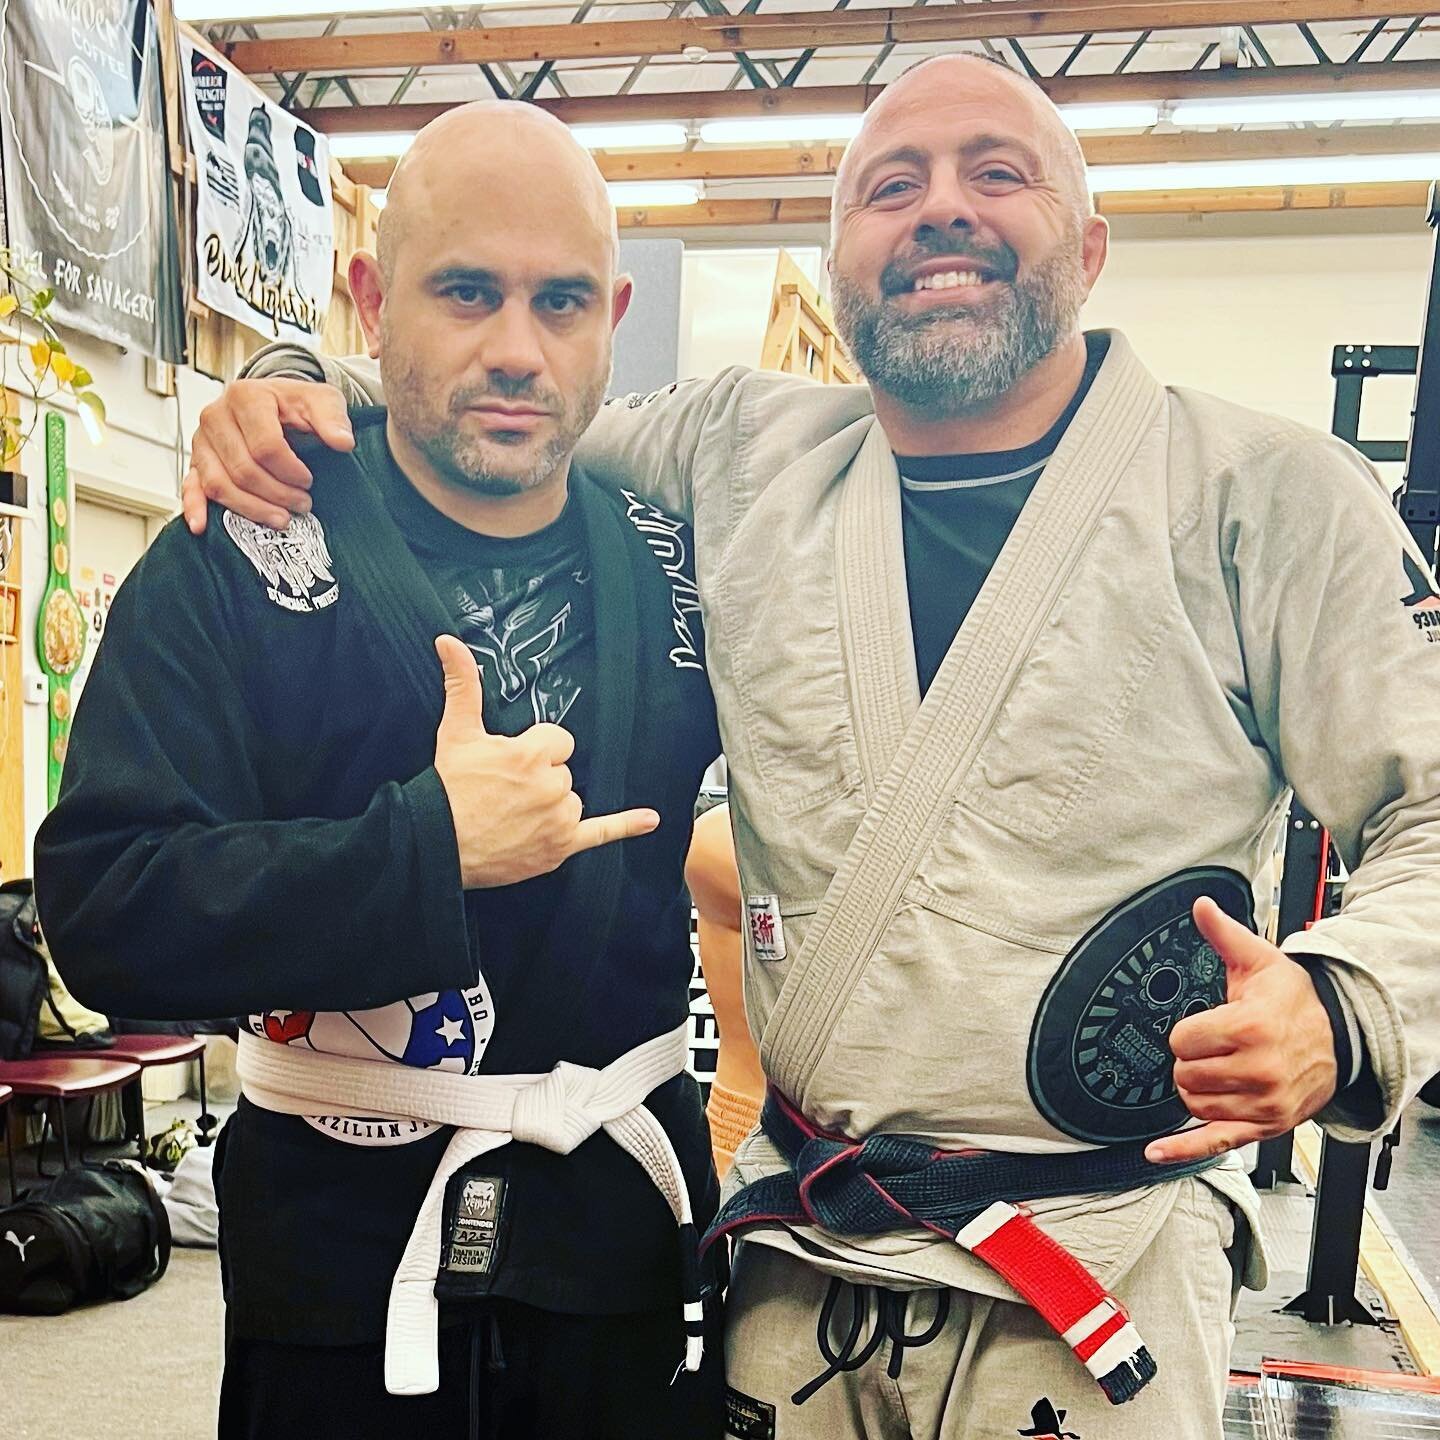 6pm today. Come try your first Brazilian jiu-jitsu class with our unique program! Professor Roland Gutierrez is coming to visit us from Journeyman Grappling. 

Known as the &lsquo;gentle art&rsquo;, Brazilian Jiu-Jitsu (BJJ) is a martial art that all